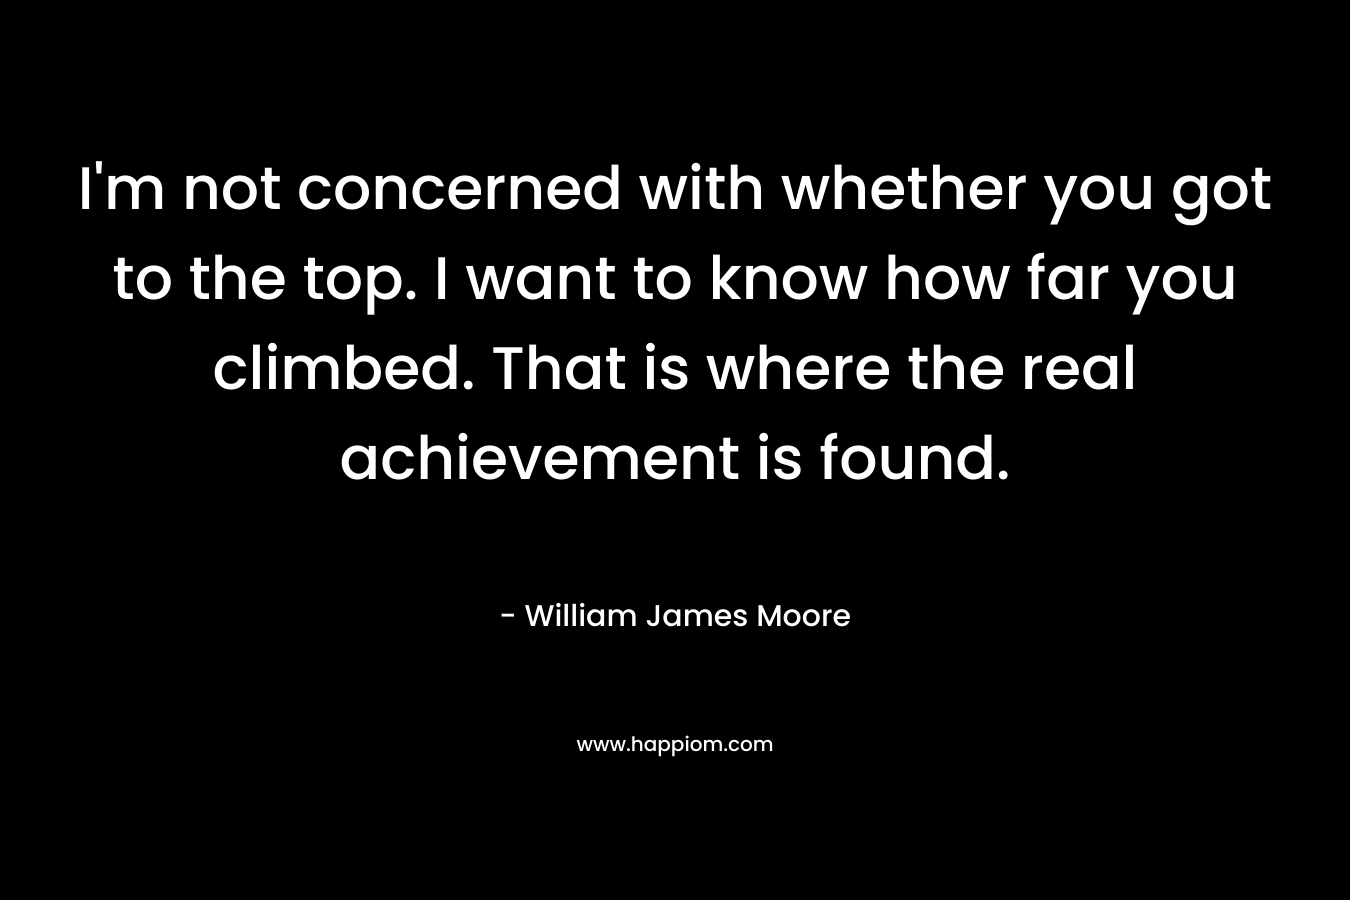 I'm not concerned with whether you got to the top. I want to know how far you climbed. That is where the real achievement is found.